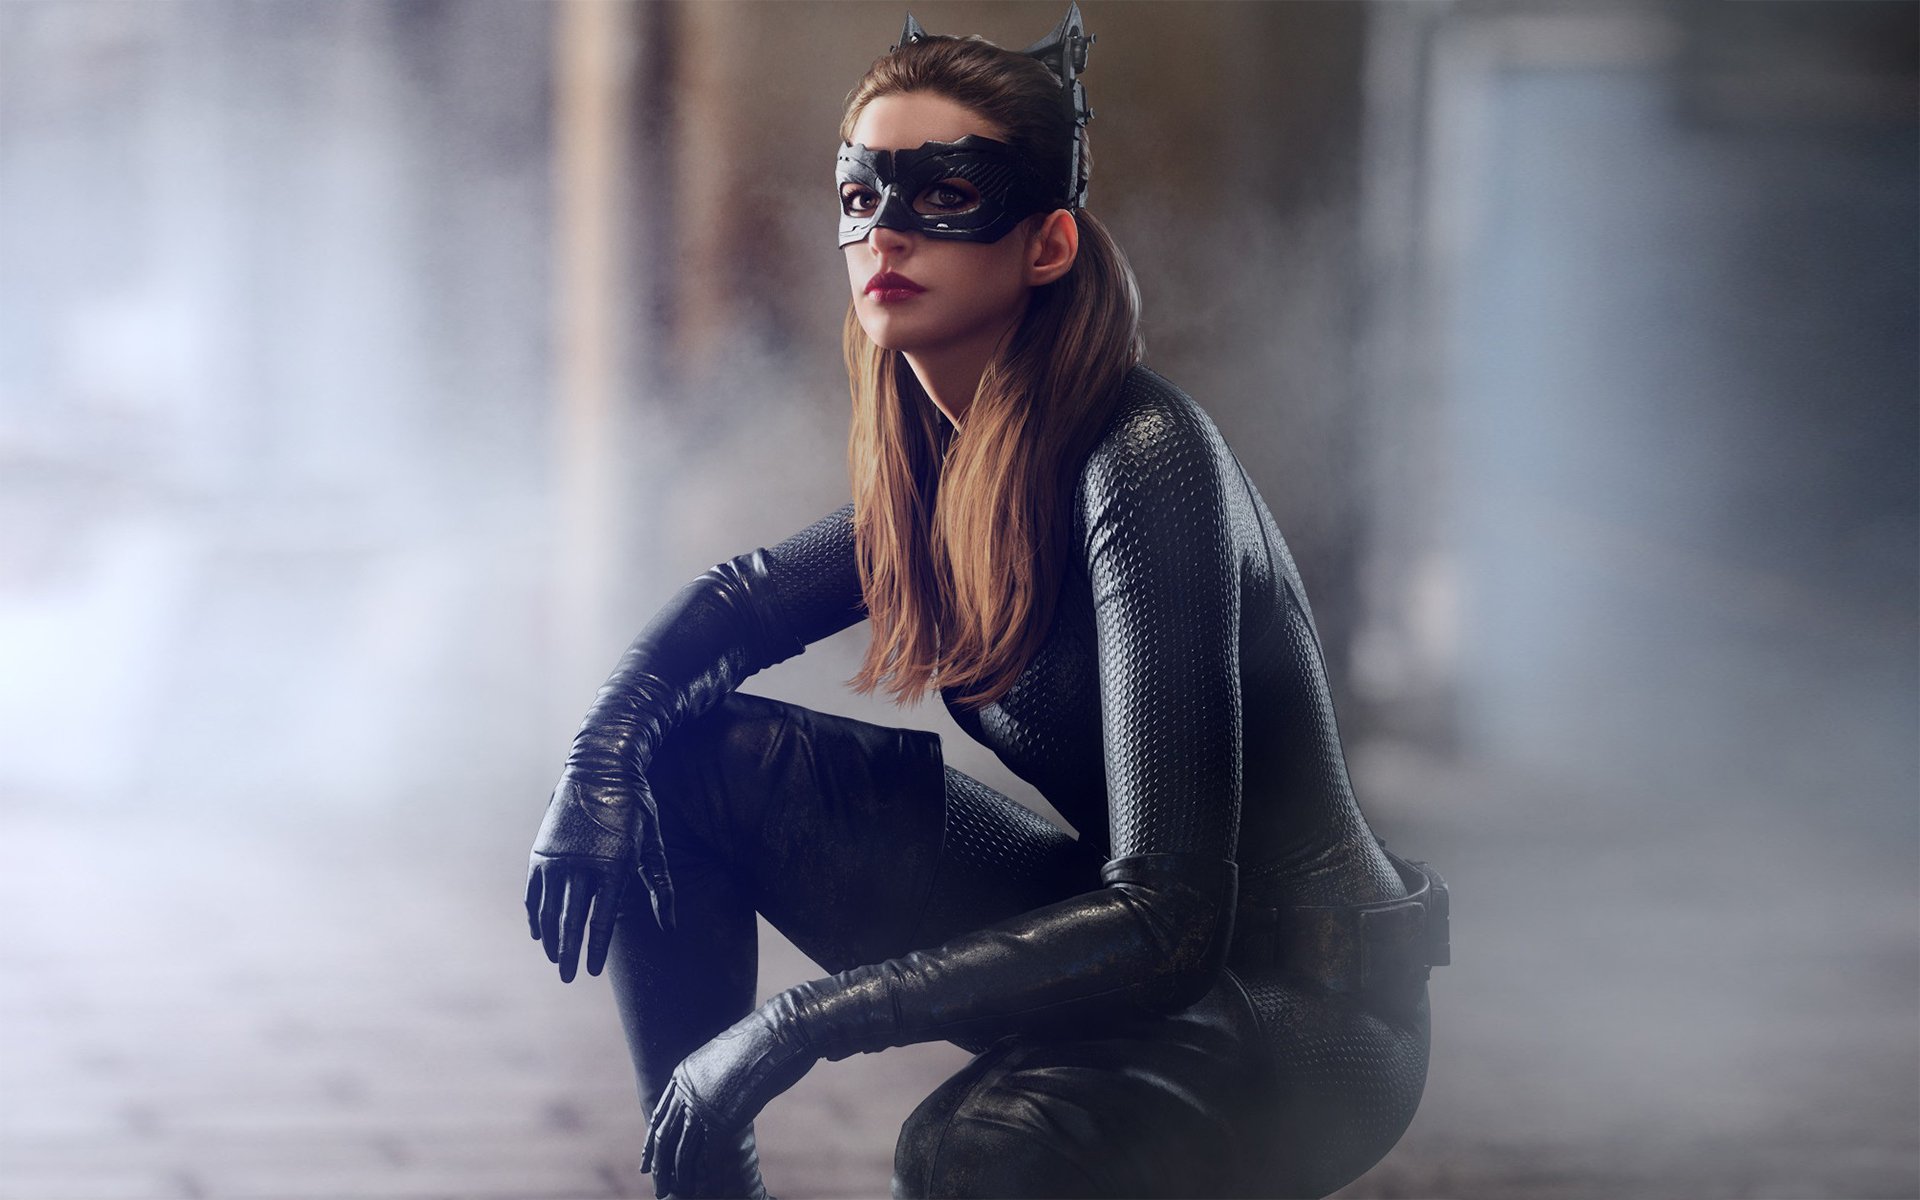 Anne Hathaway Catwoman Motorcycle